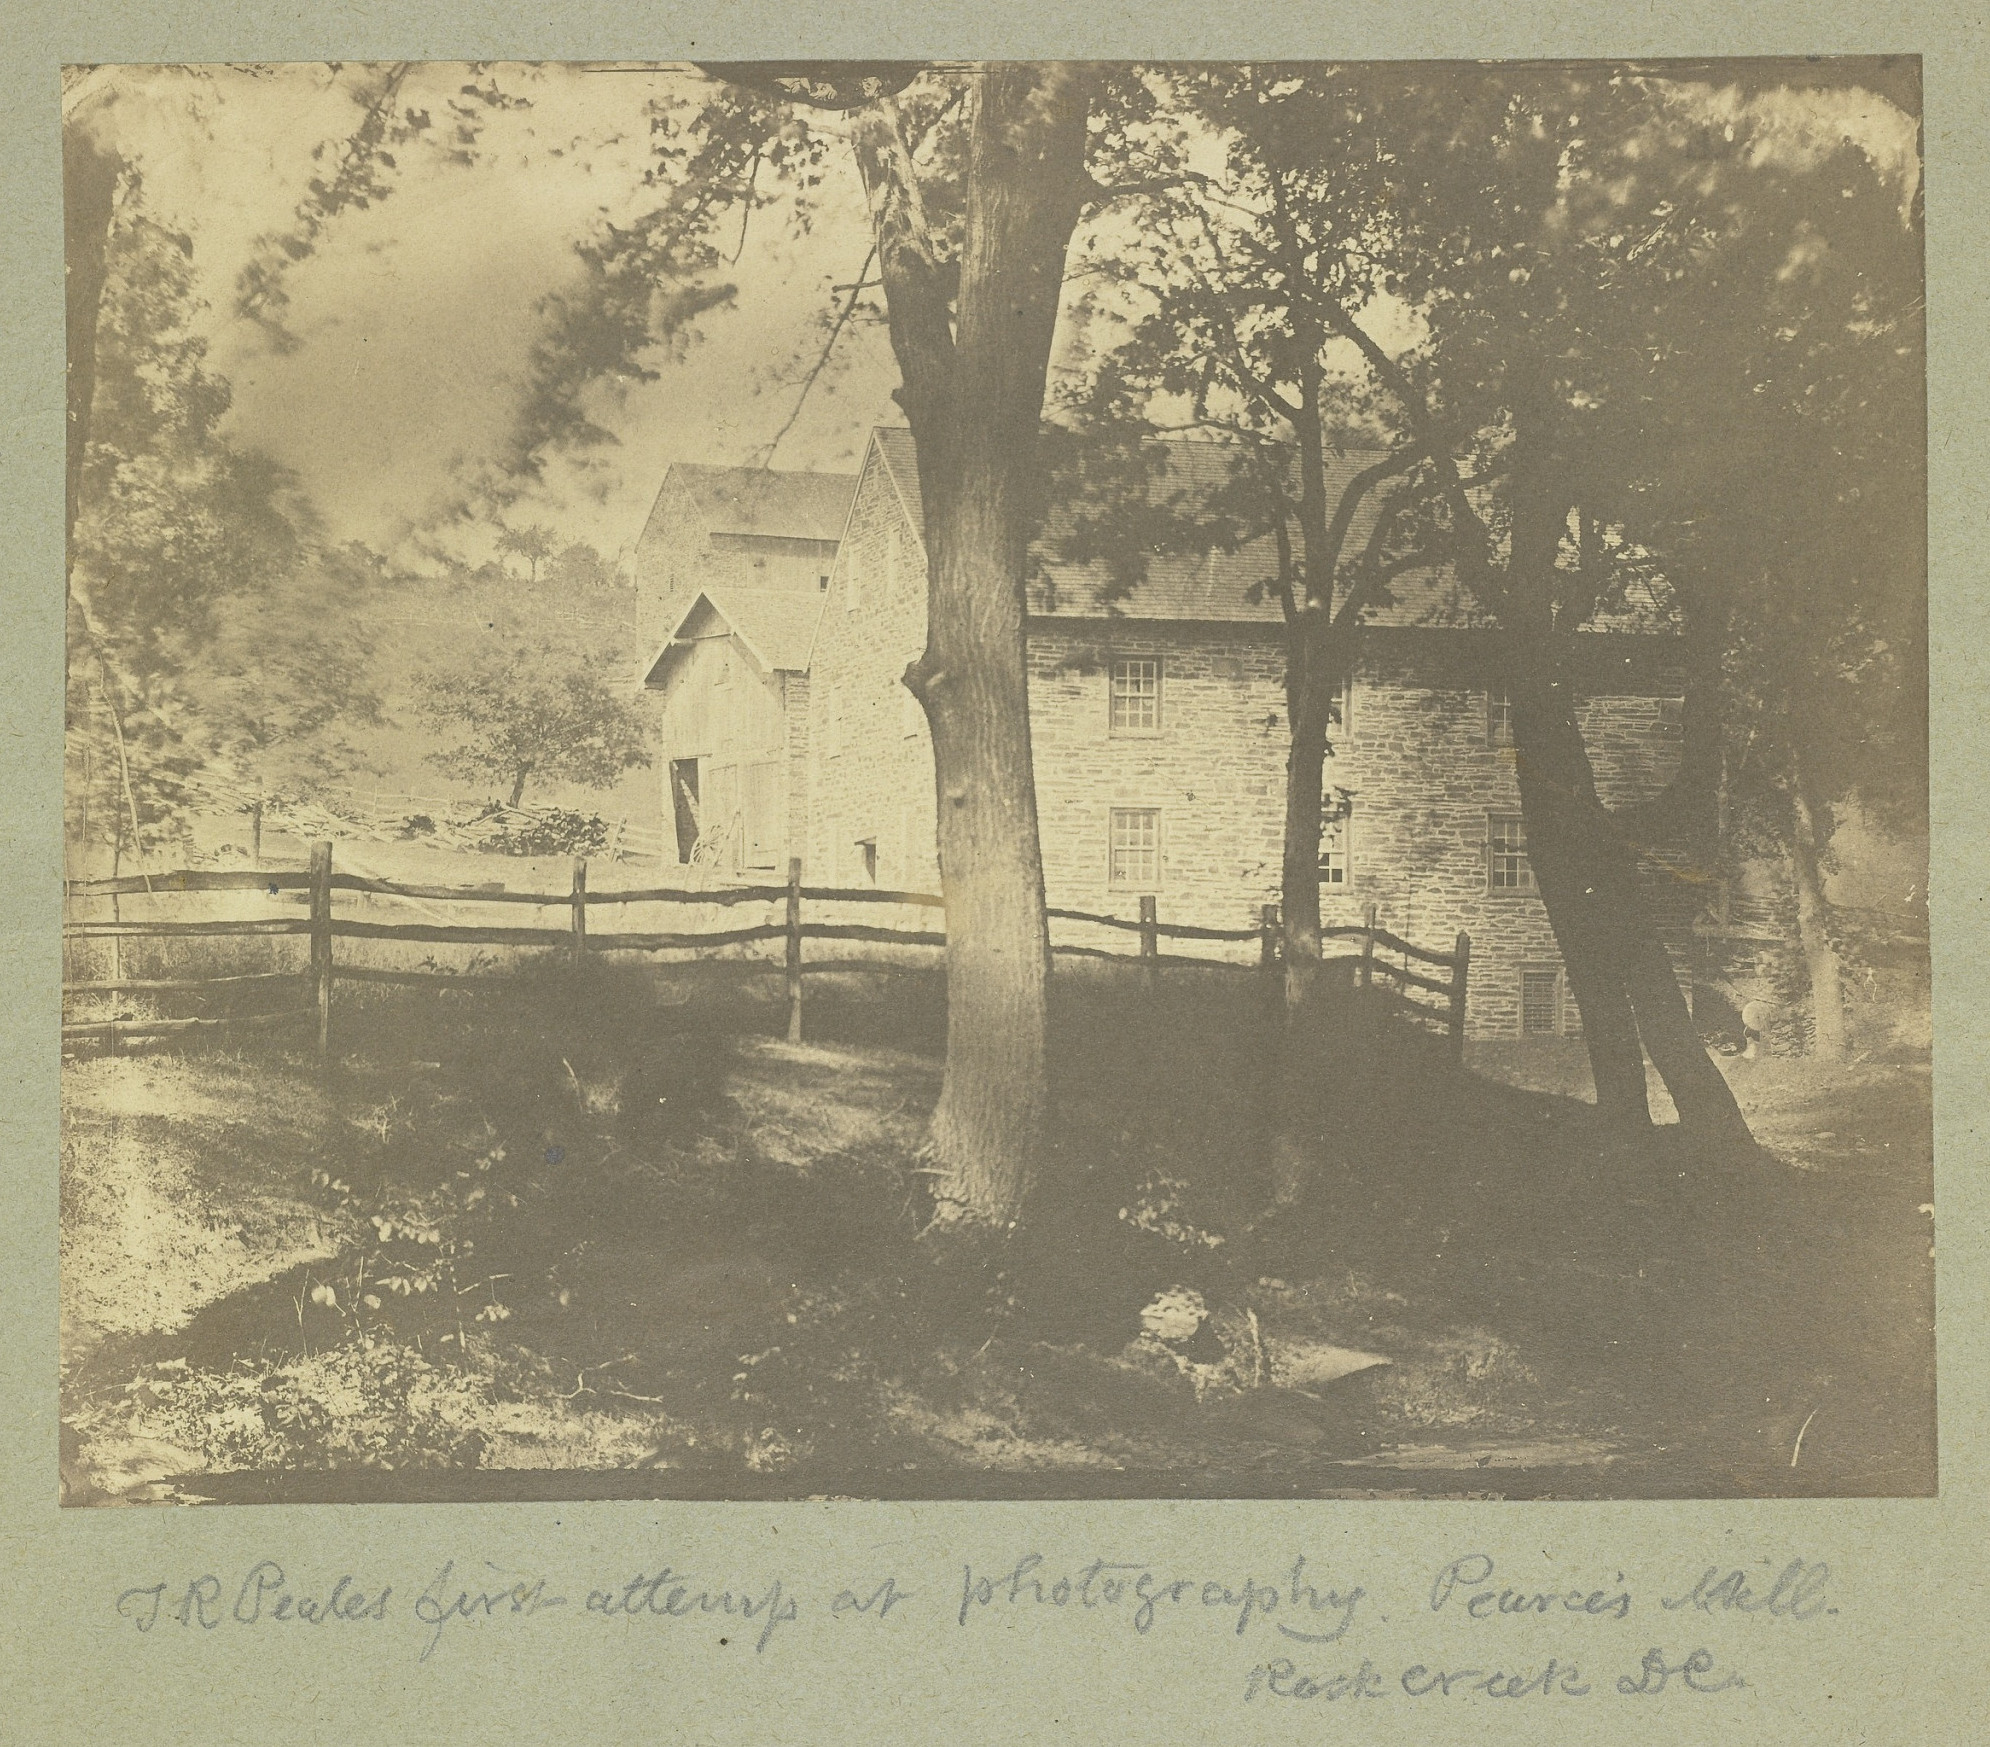 Very old sepia-toned photograph of Peirce Mill with two stone barns in distance.